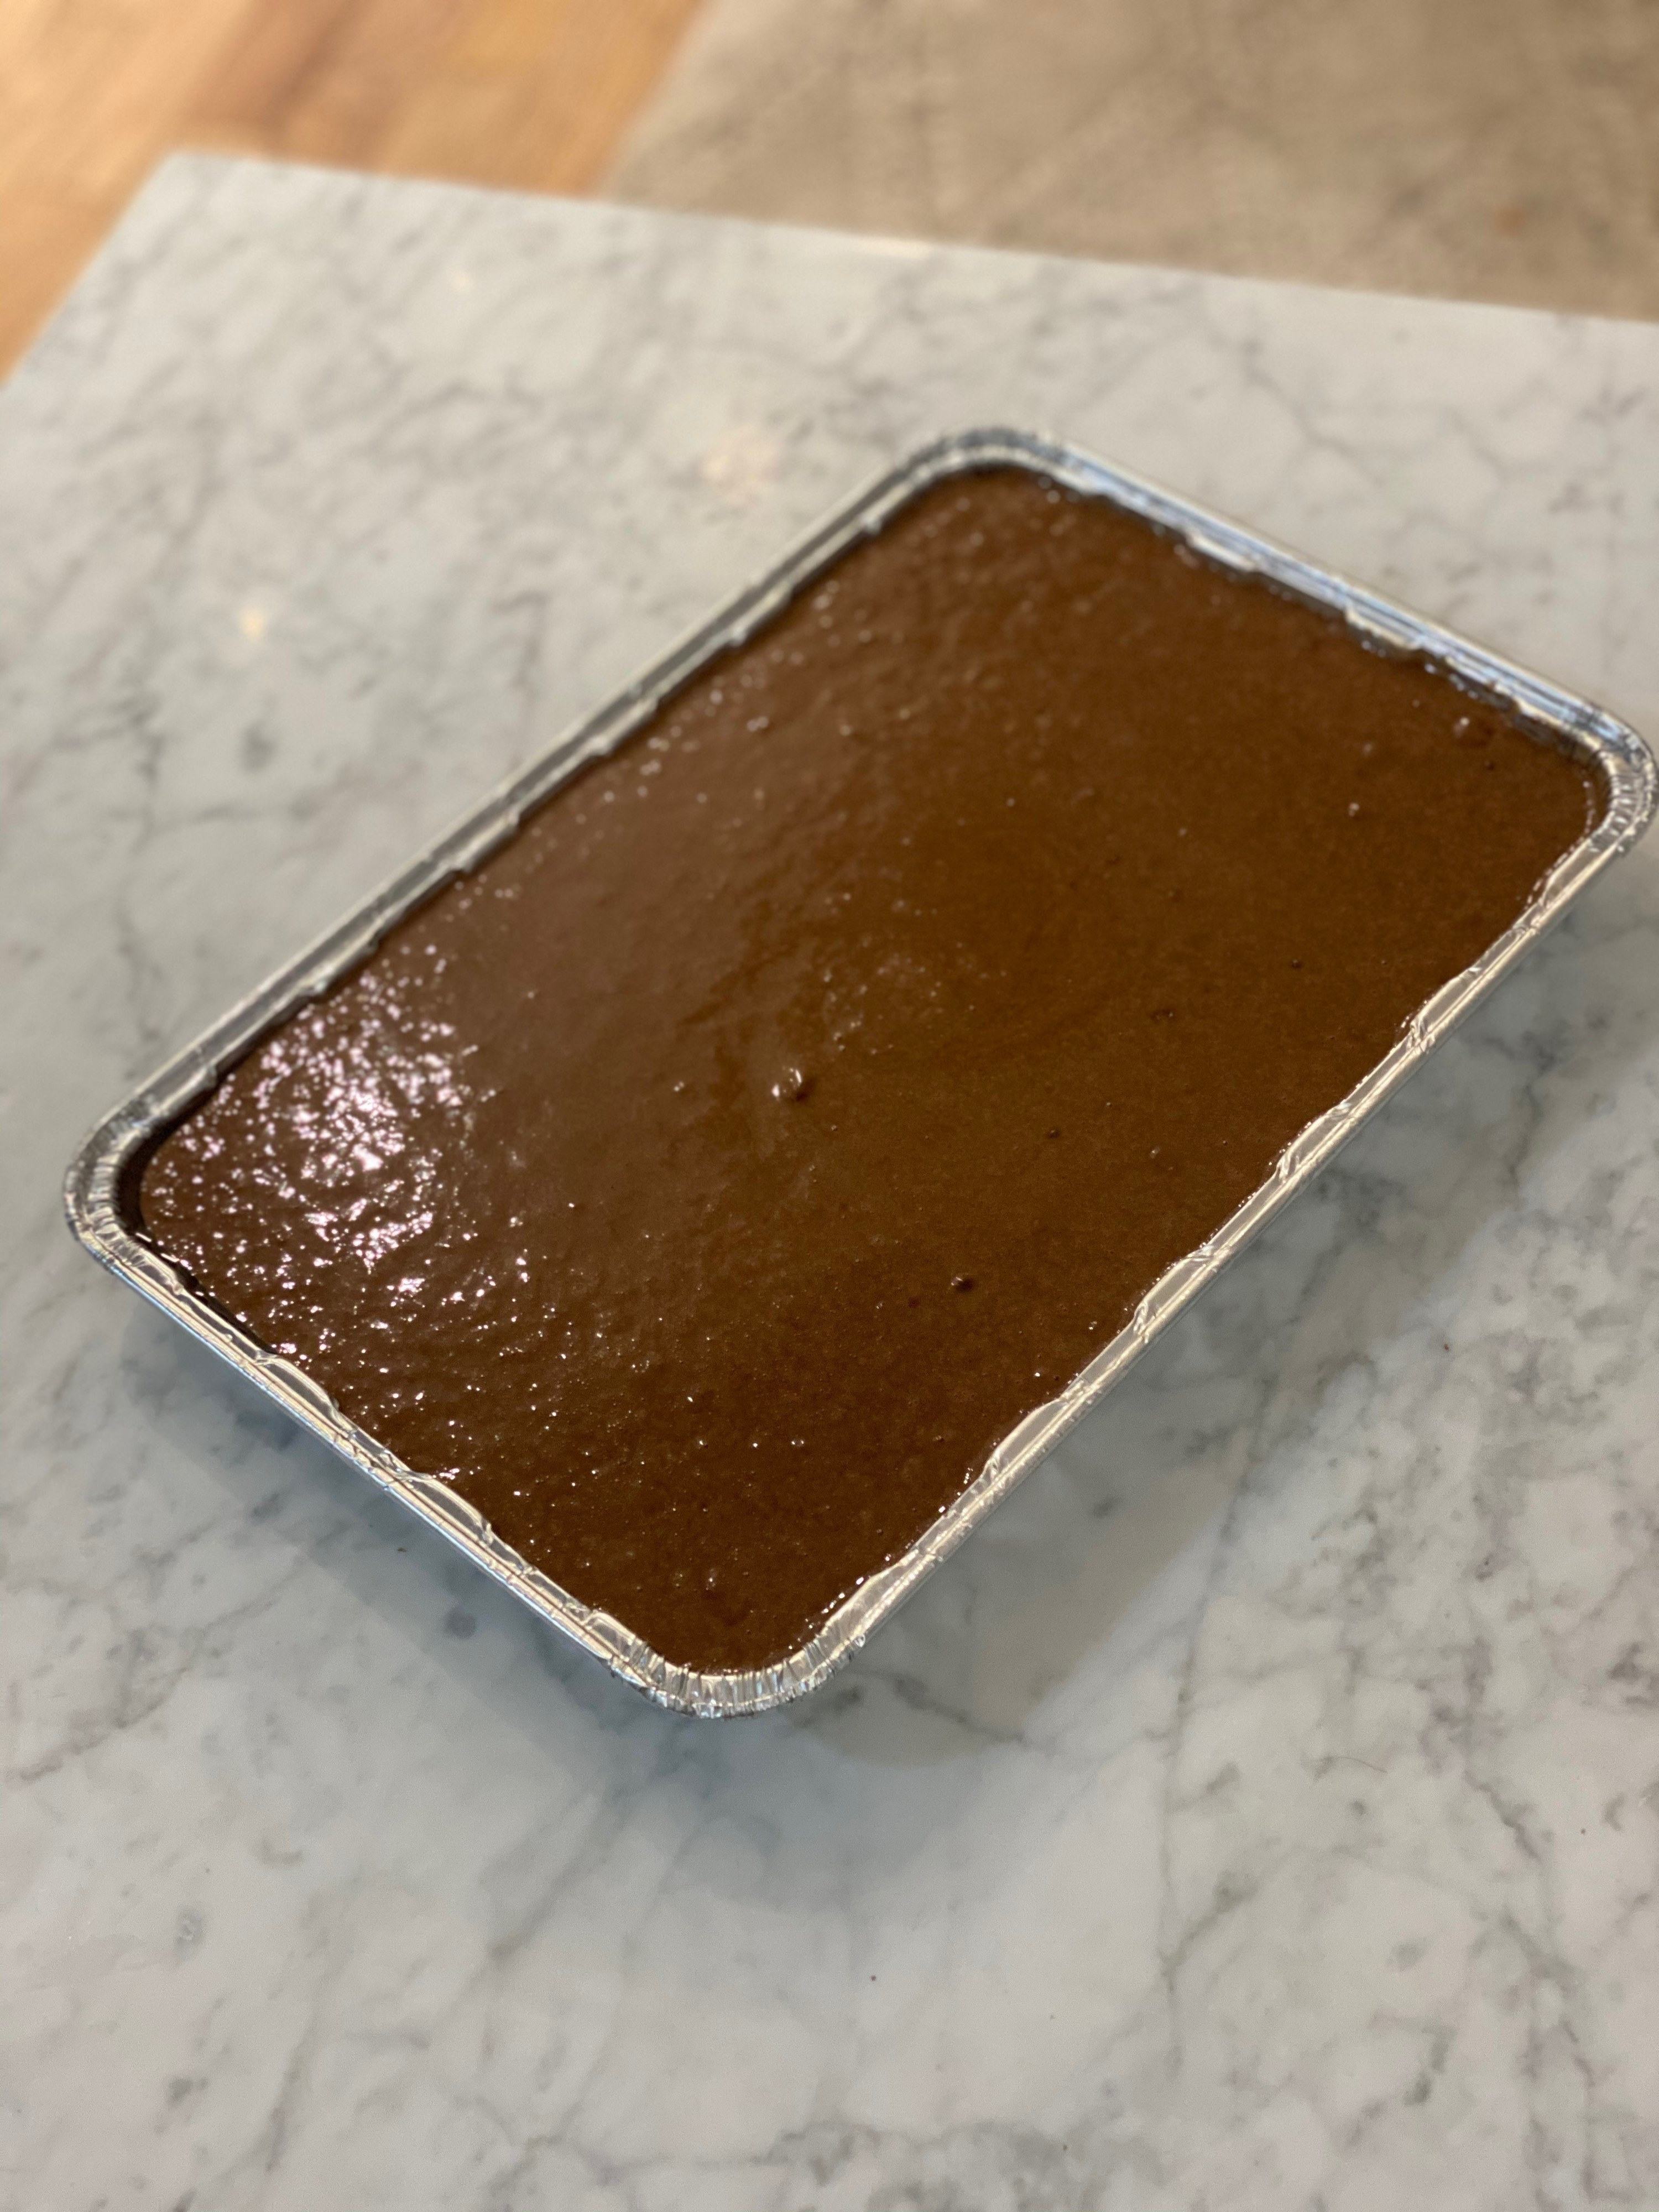 Chocolate cake batter in an aluminum cake tray, ready for the oven.